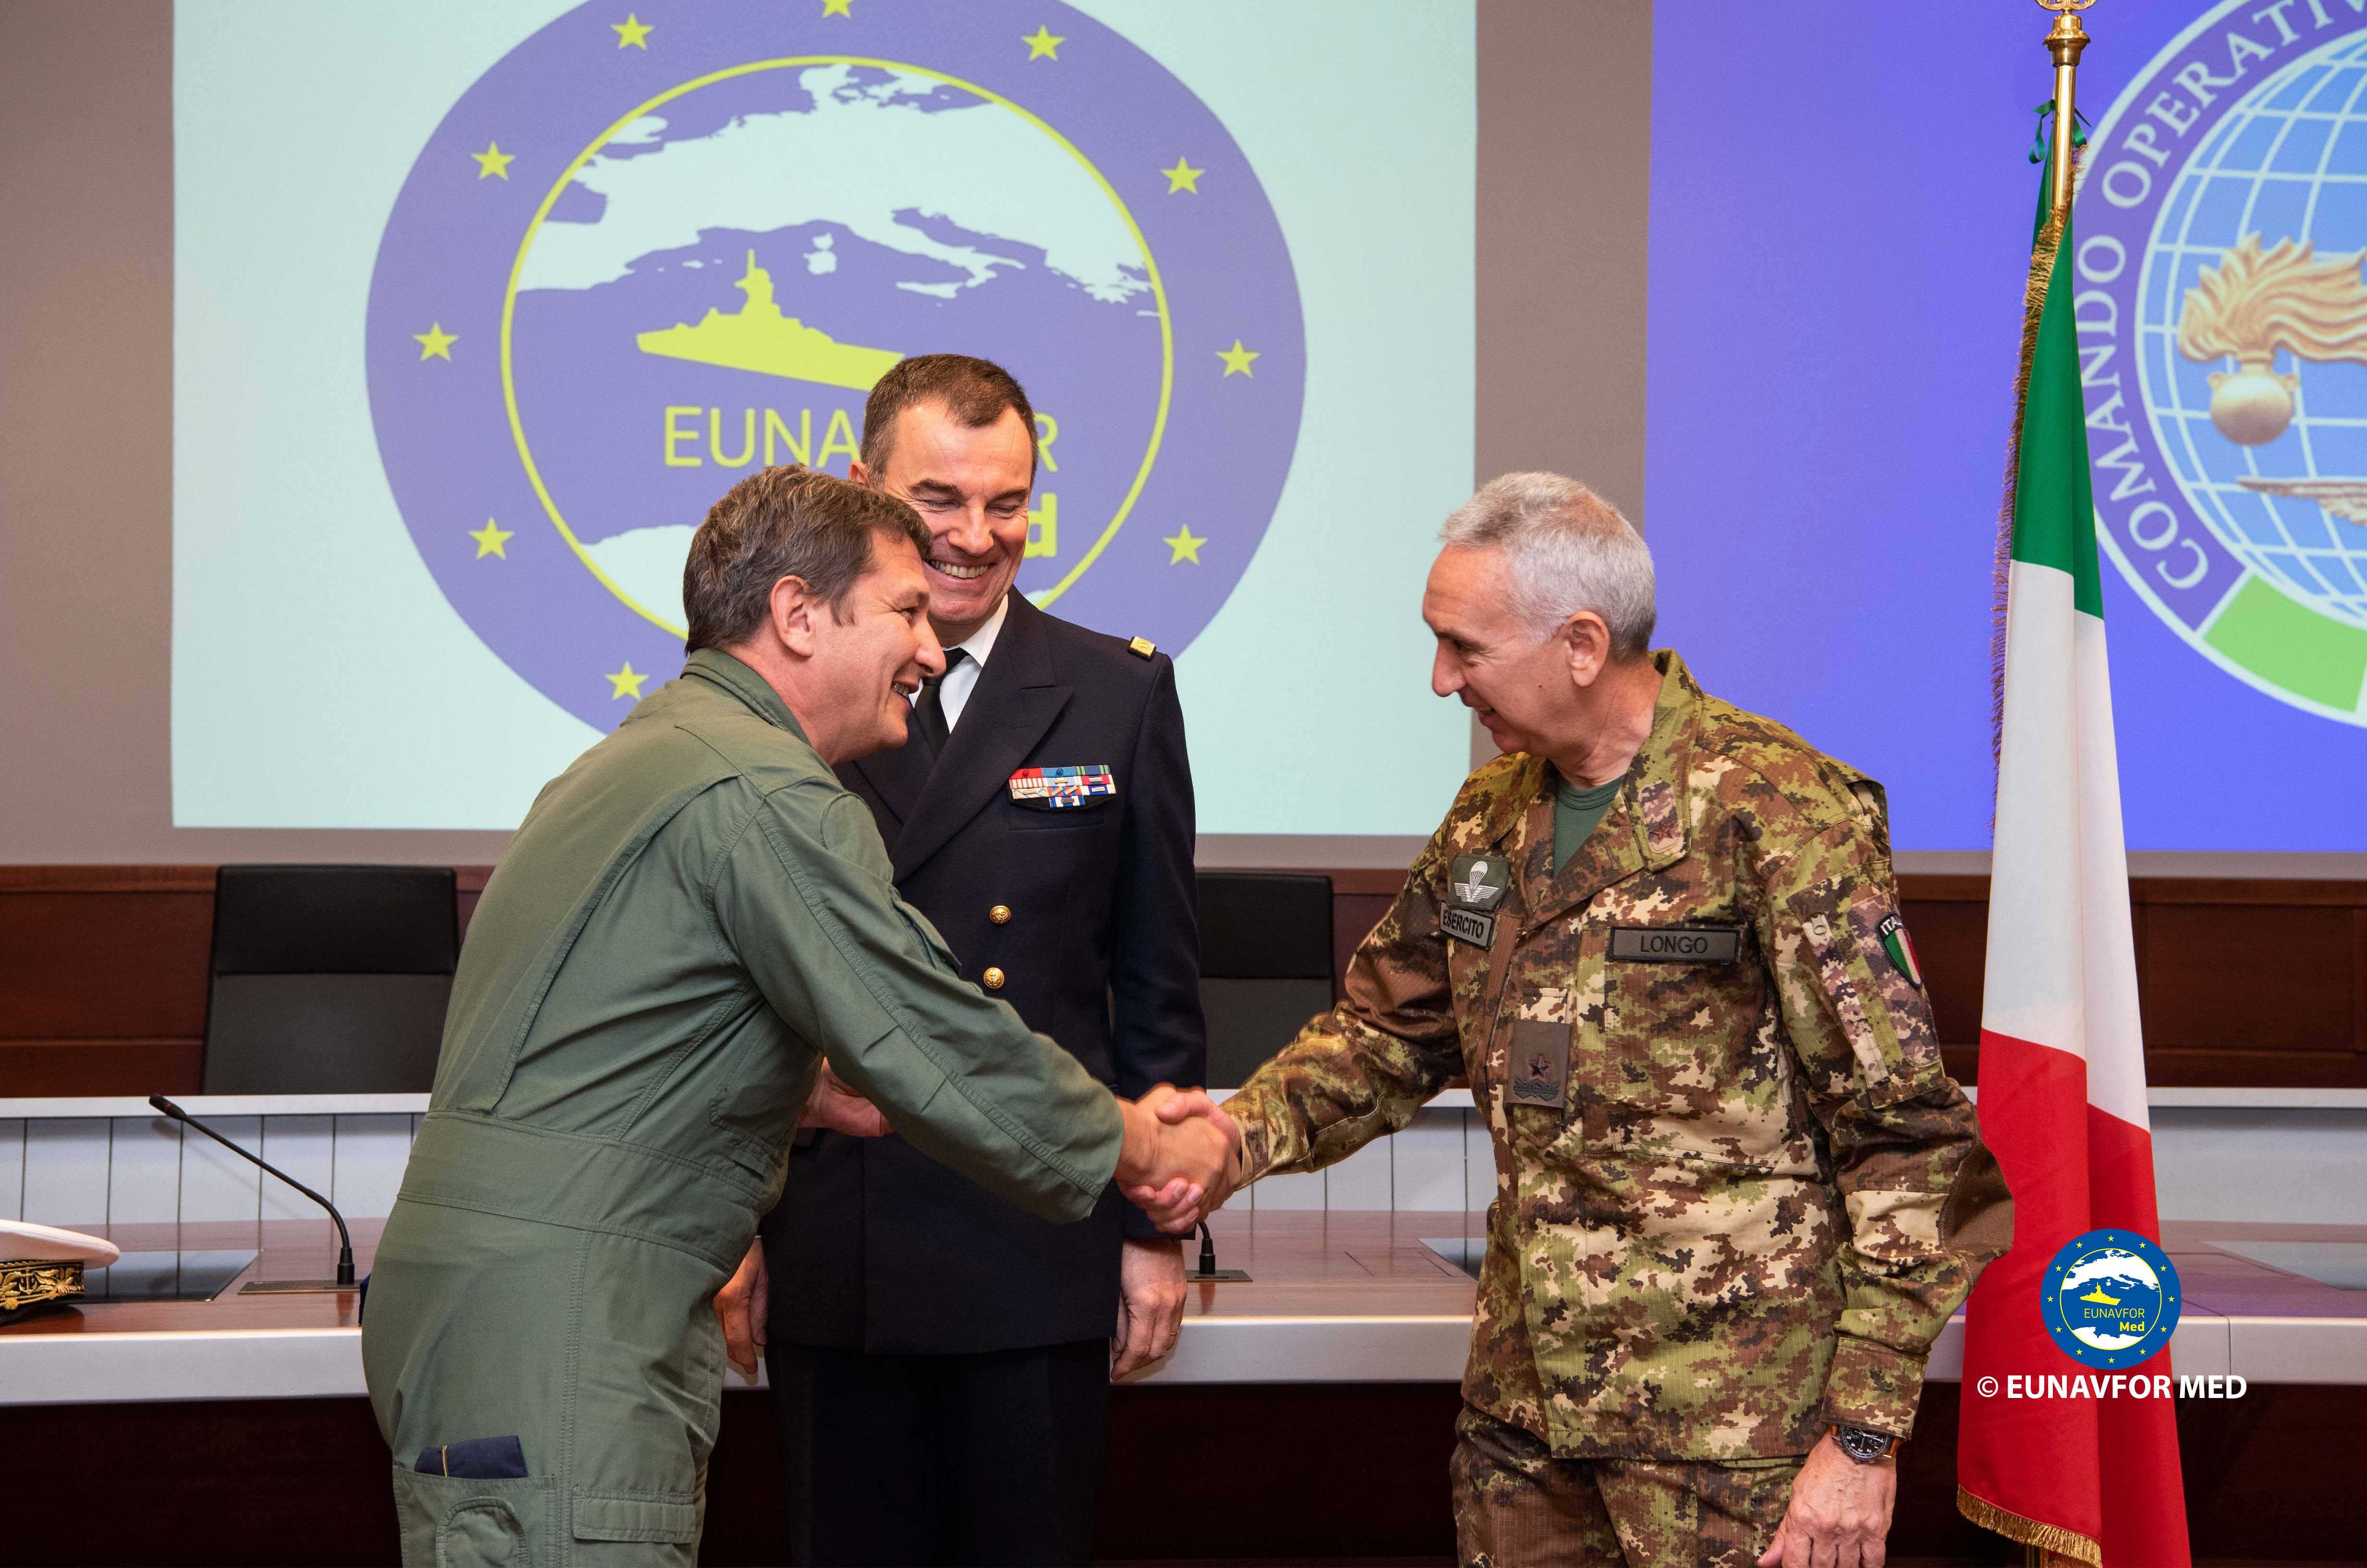 A new Chief of Staff for EUNAVFOR MED Operation Sophia OHQ